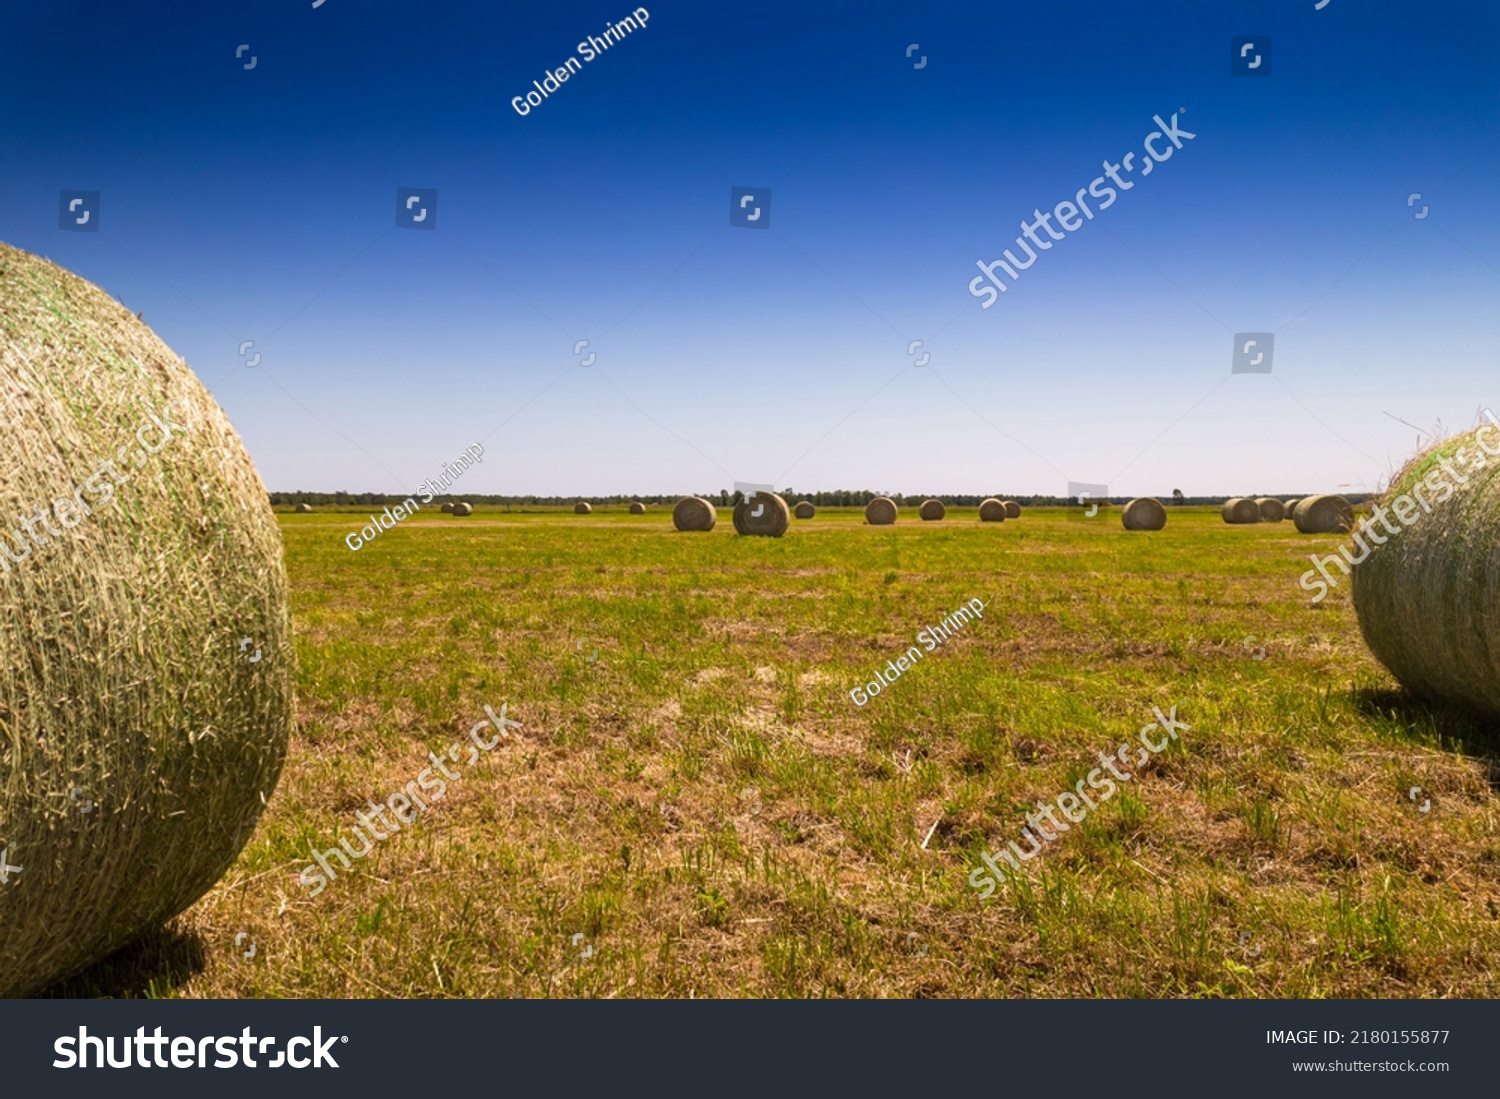 Summer Field Hay Bales After Harvest Stock Photo 2180155877 Shutterstock